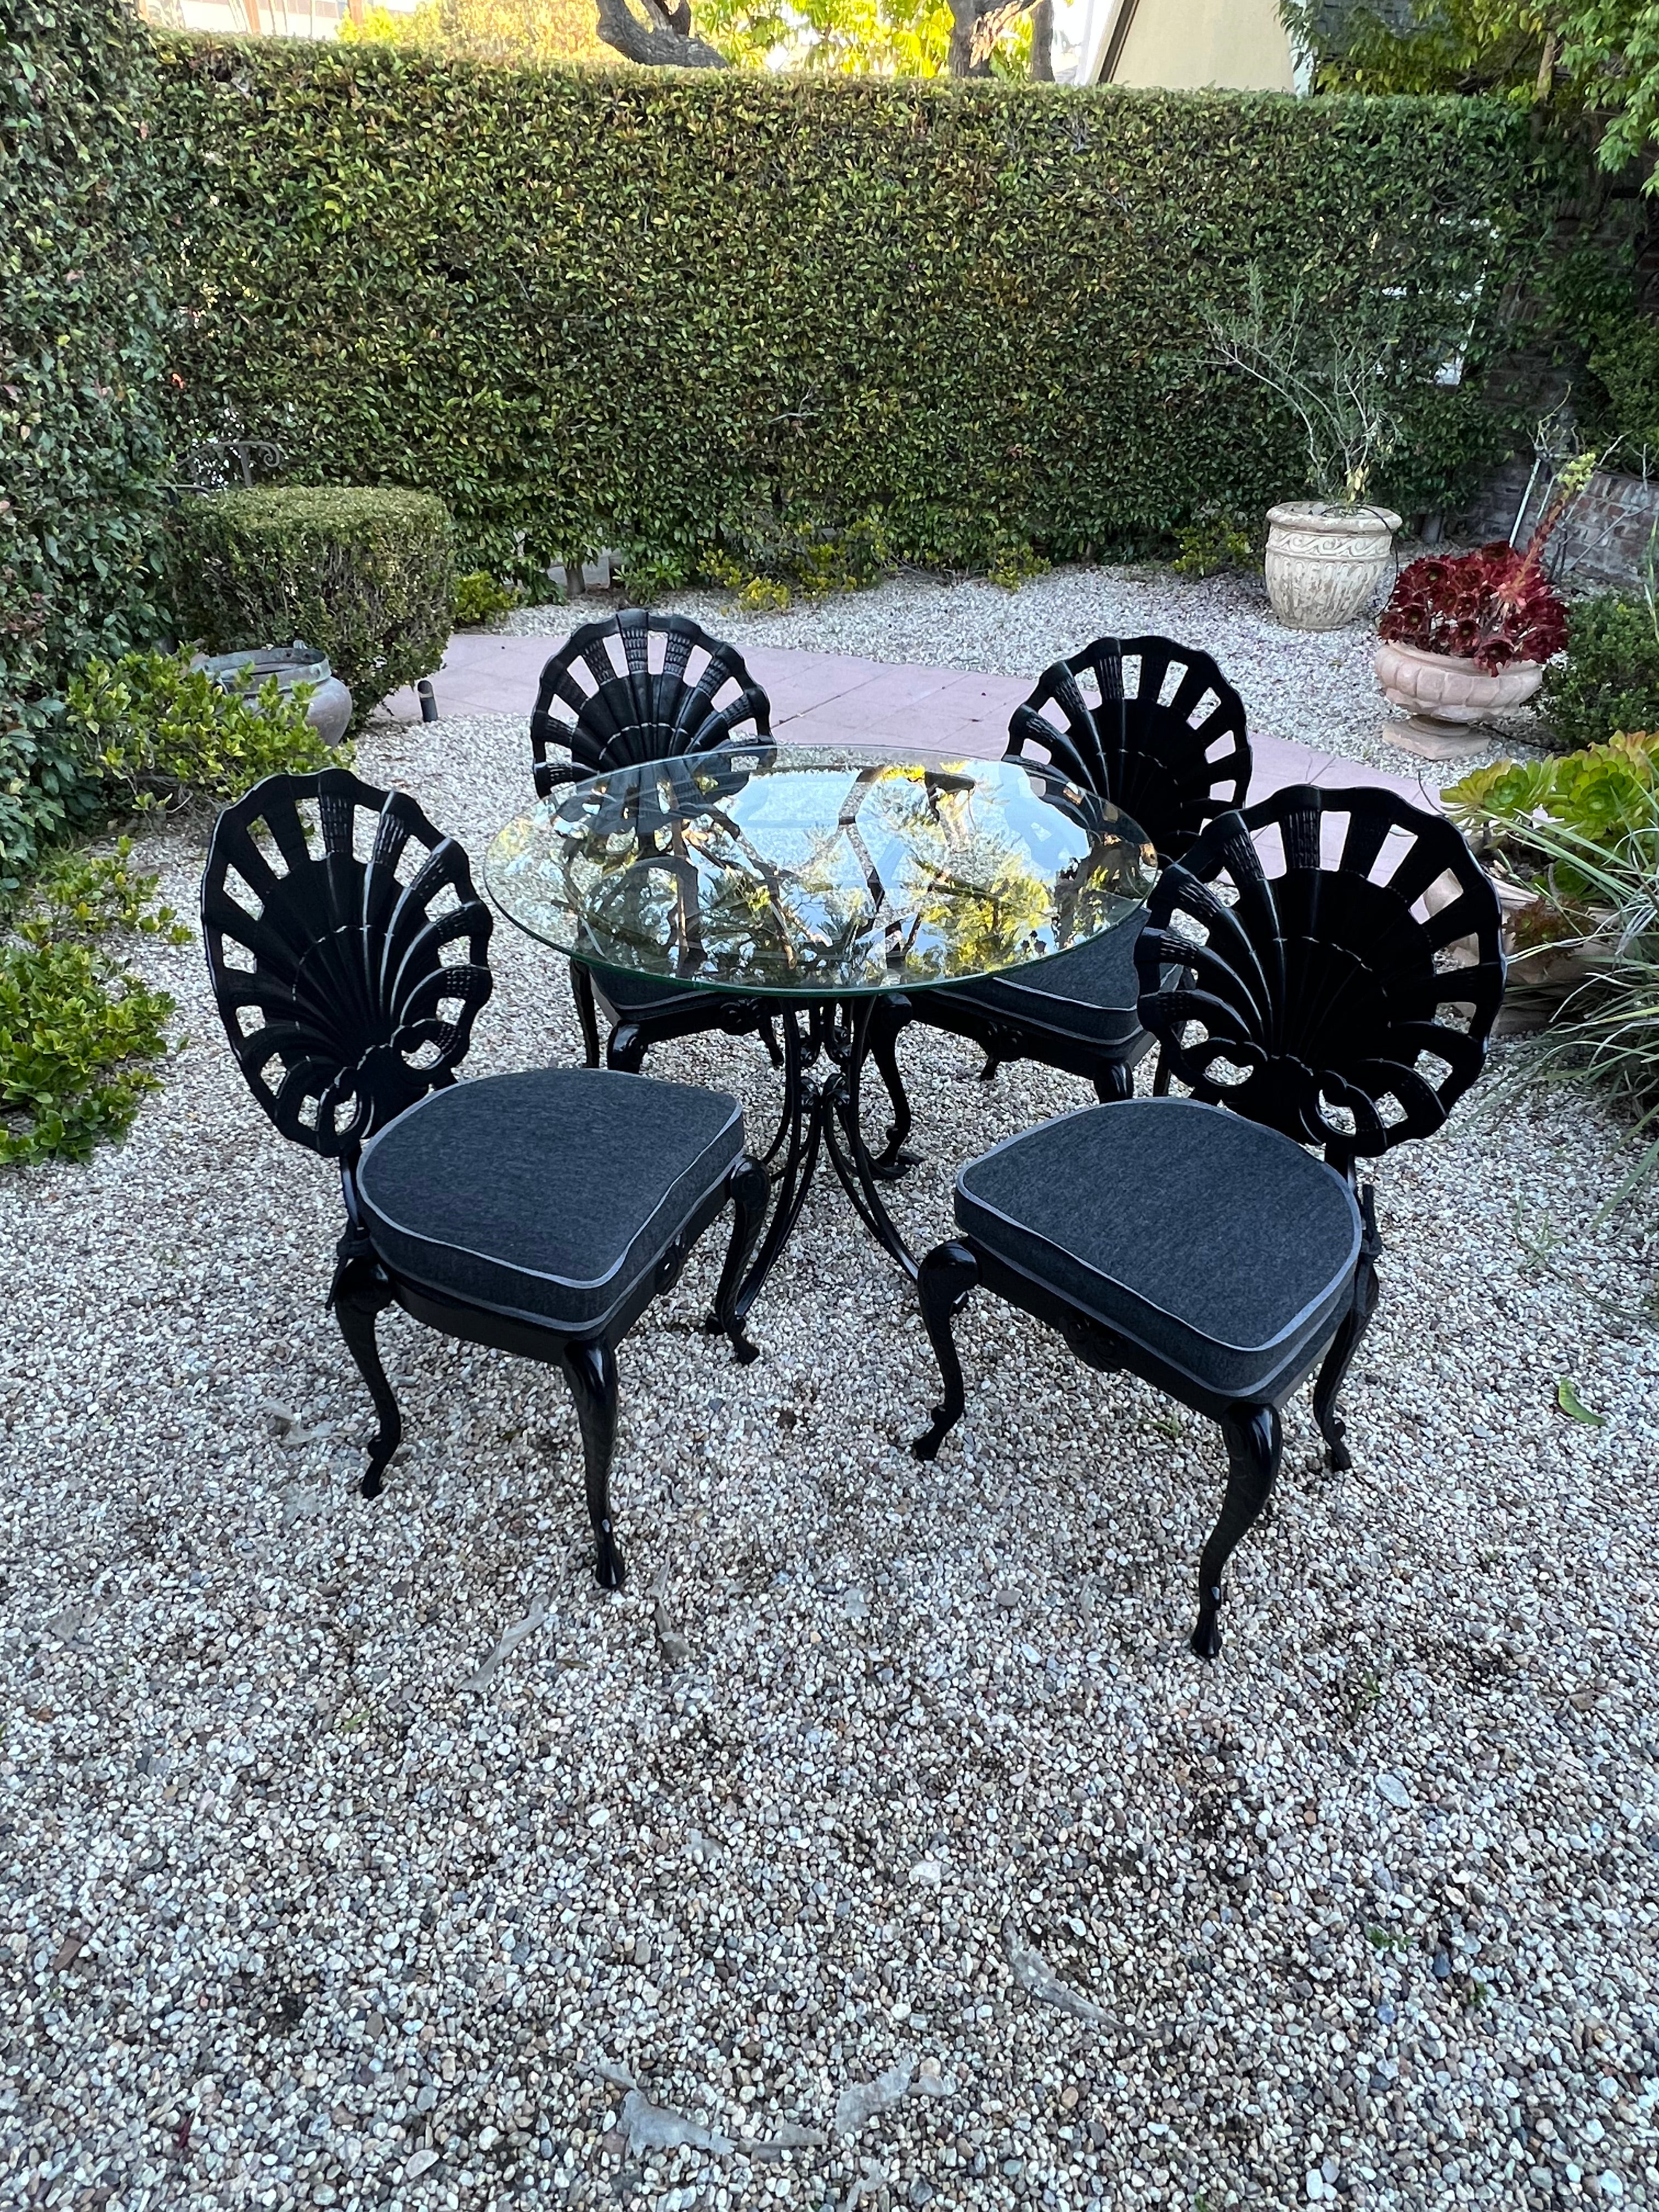 A set of four Grotto chairs newly upholstered and powder coated. The set are a compliment to any dining area, inside or out of doors. The powder coating allows them to be outside as does the outdoor sunbrella fabric. A wonderful set of four chairs